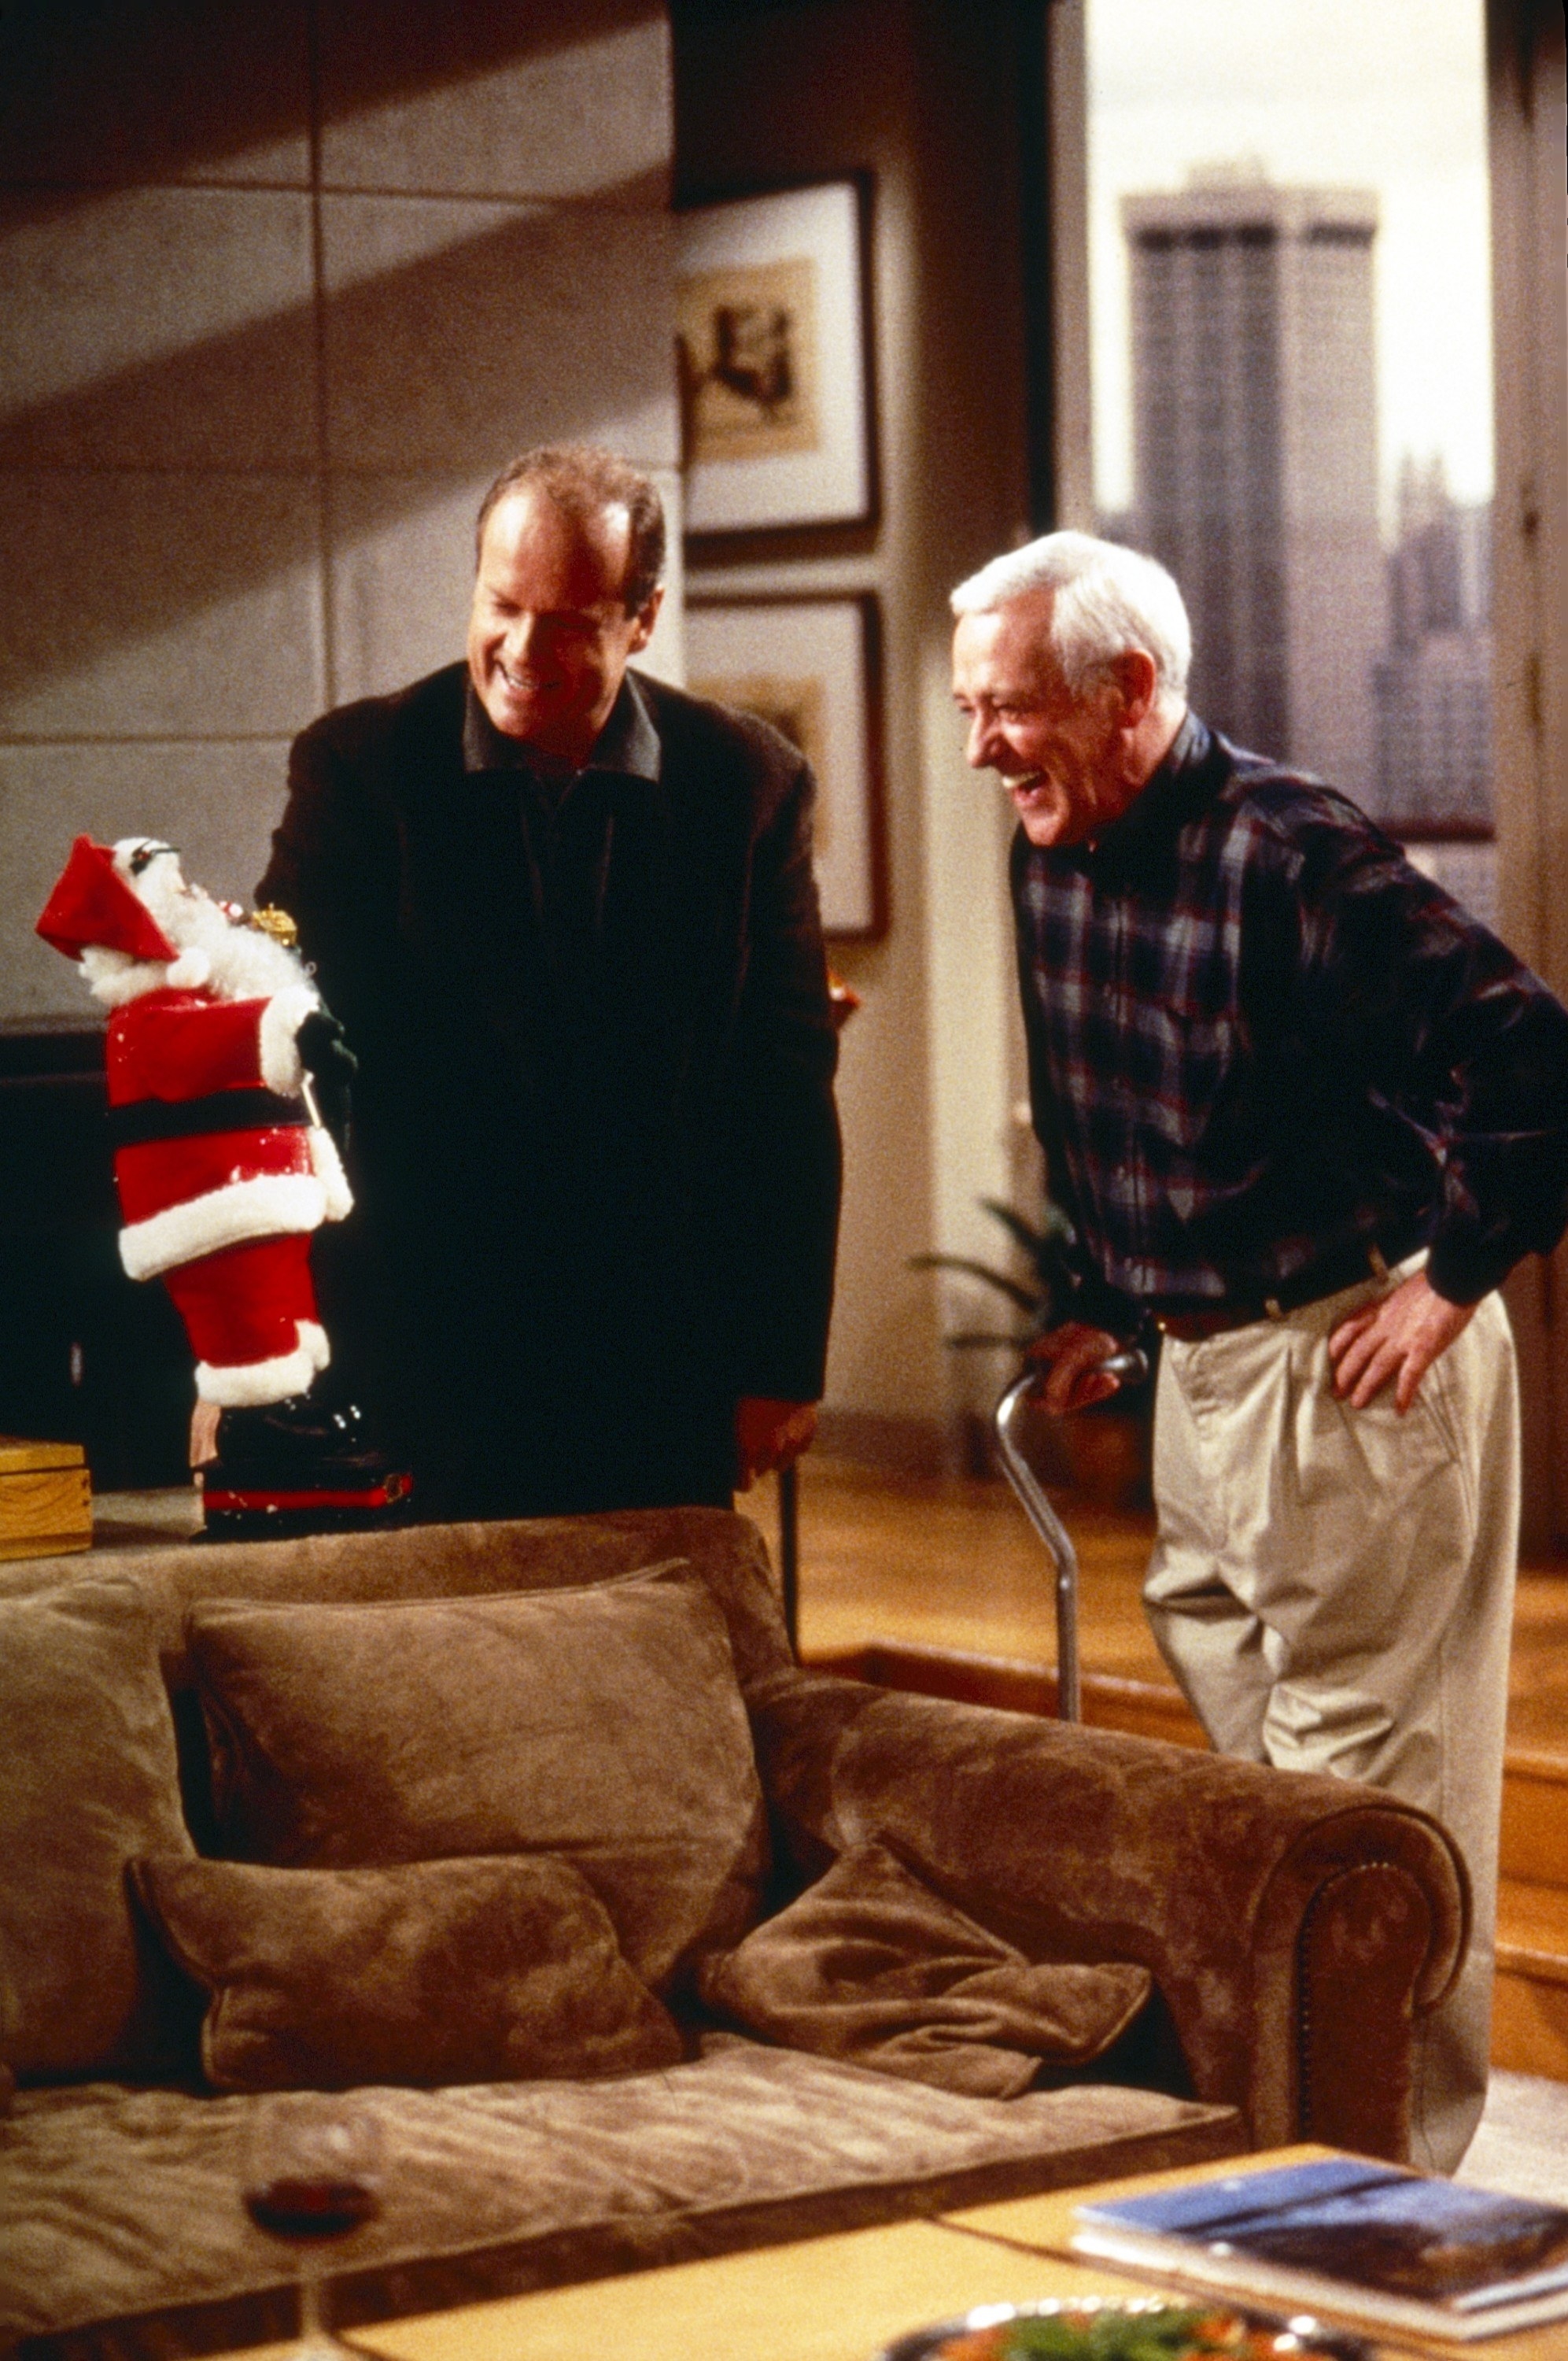 Kelsey Grammer, John Mahoney laughing while looking at a toy santa claus on a table